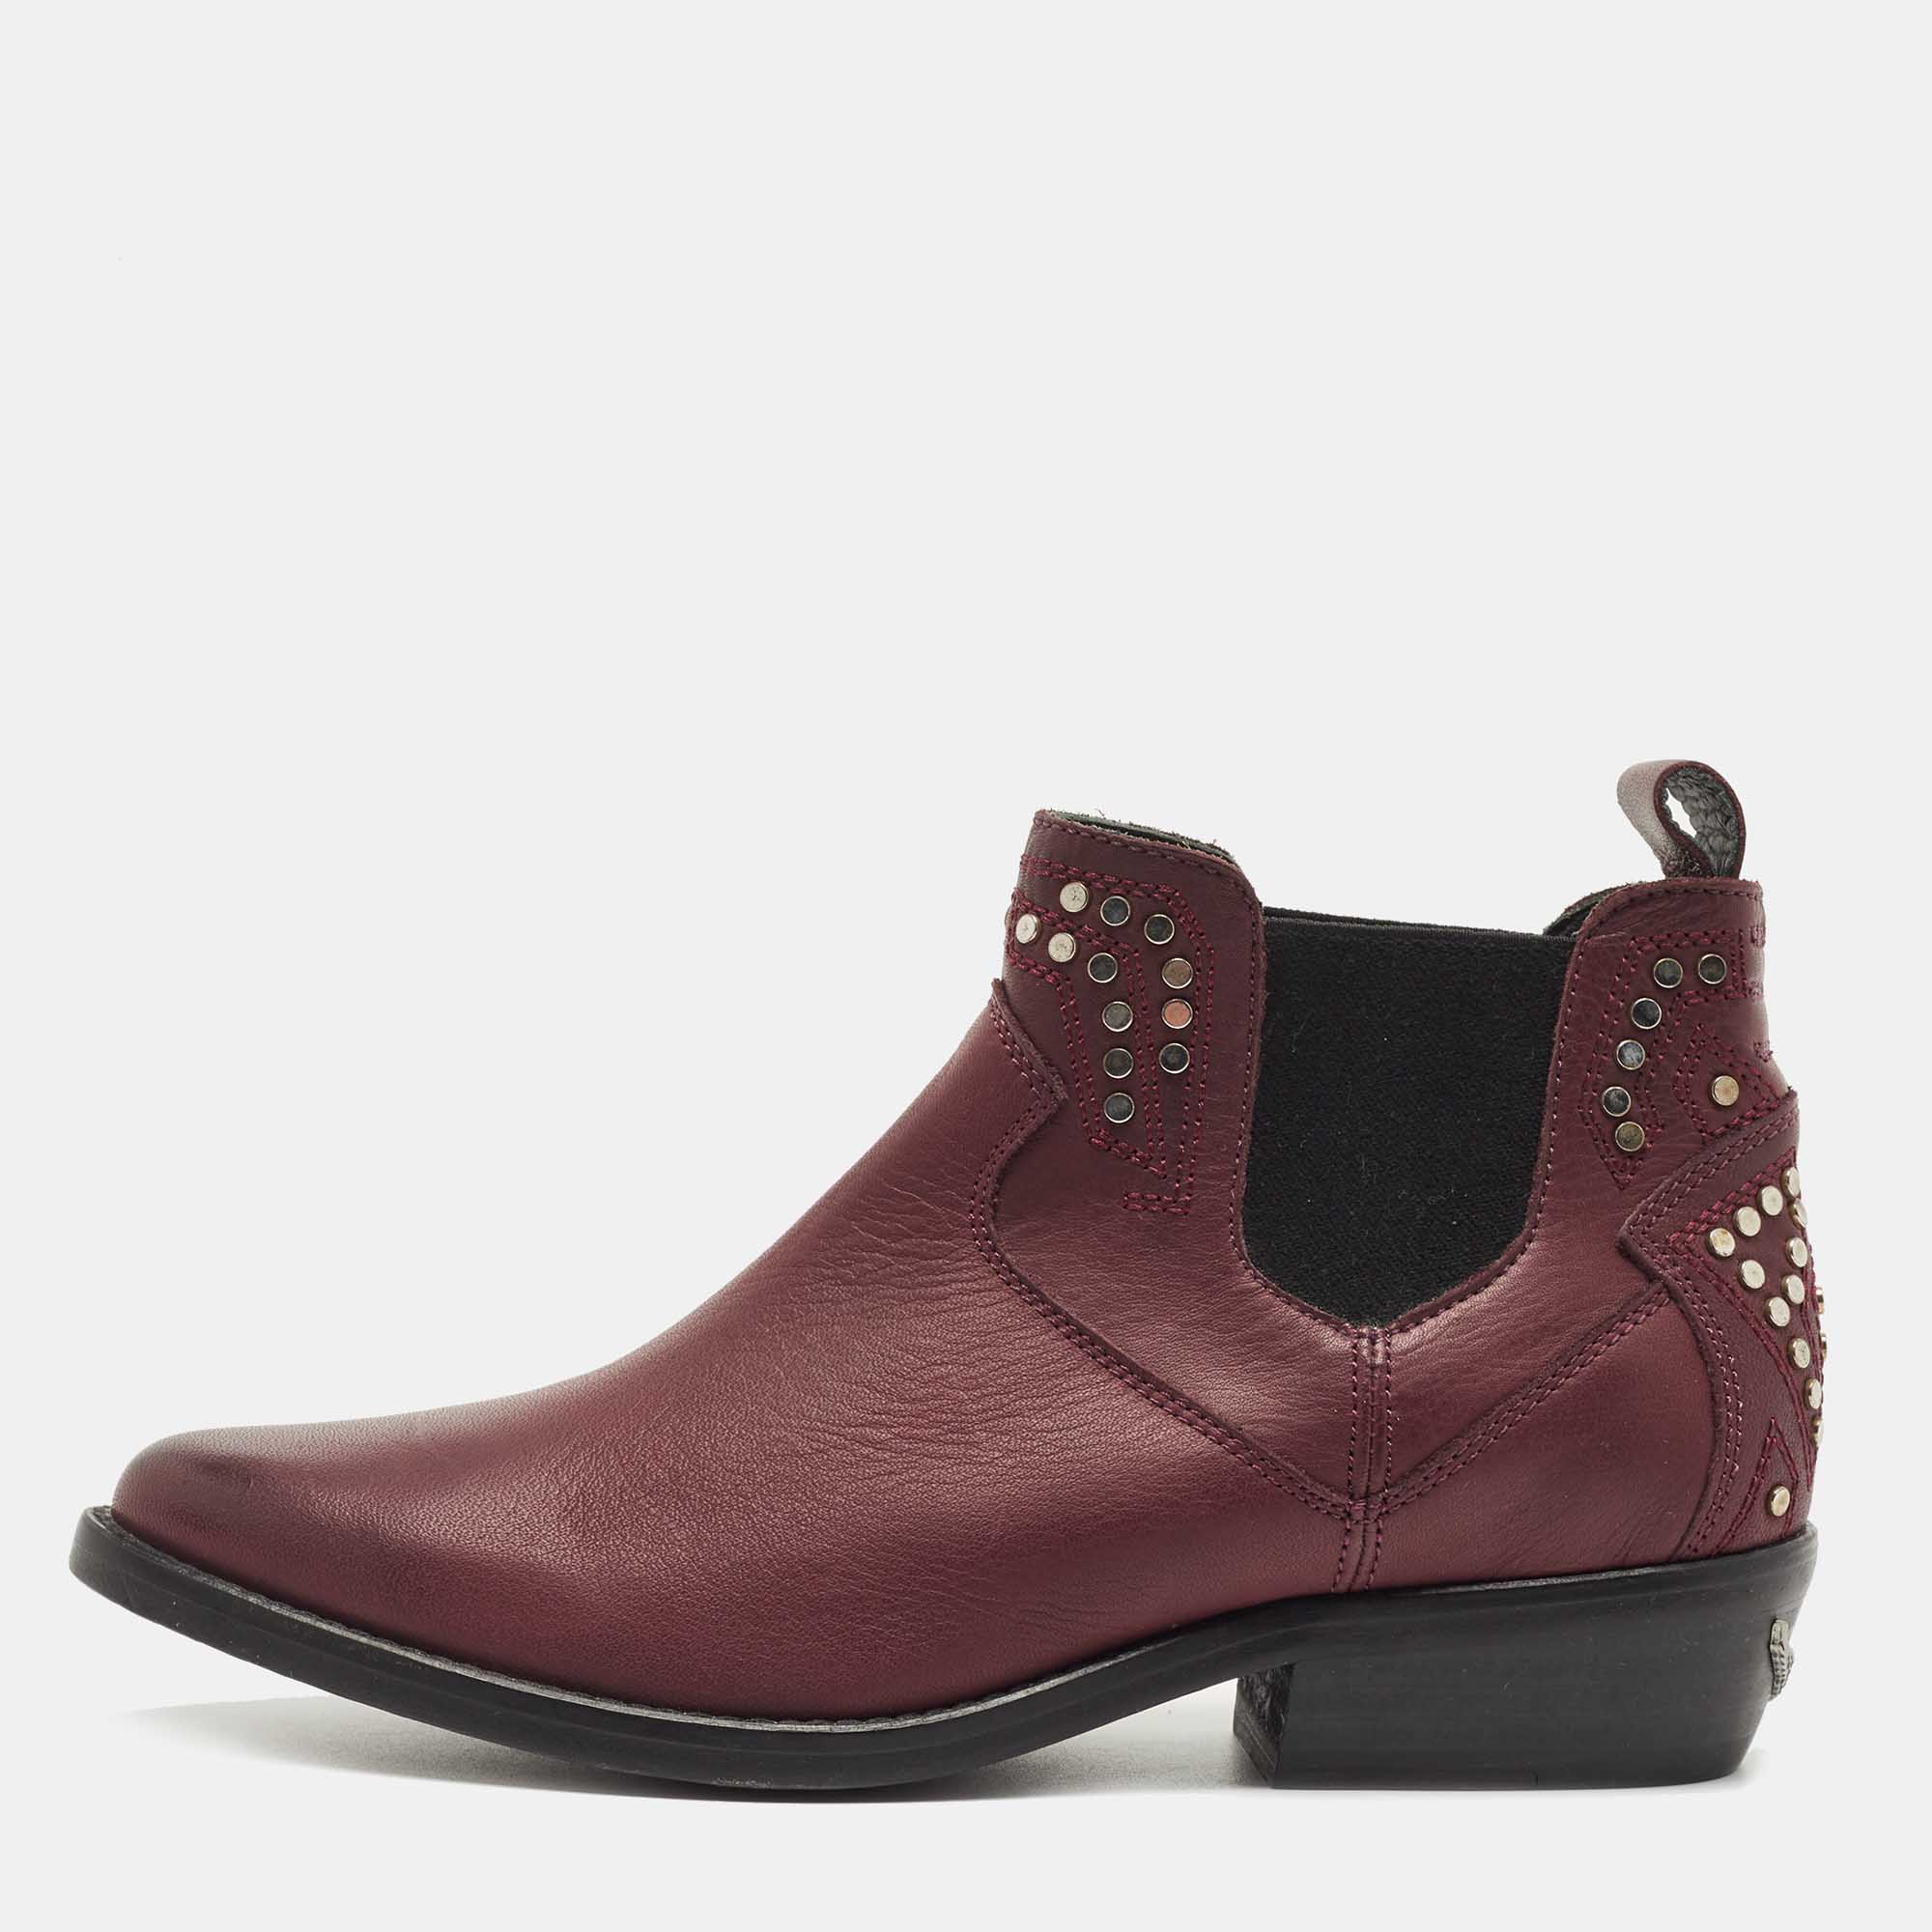 Zadig & voltaire burgundy leather thylana studded ankle booties size 36